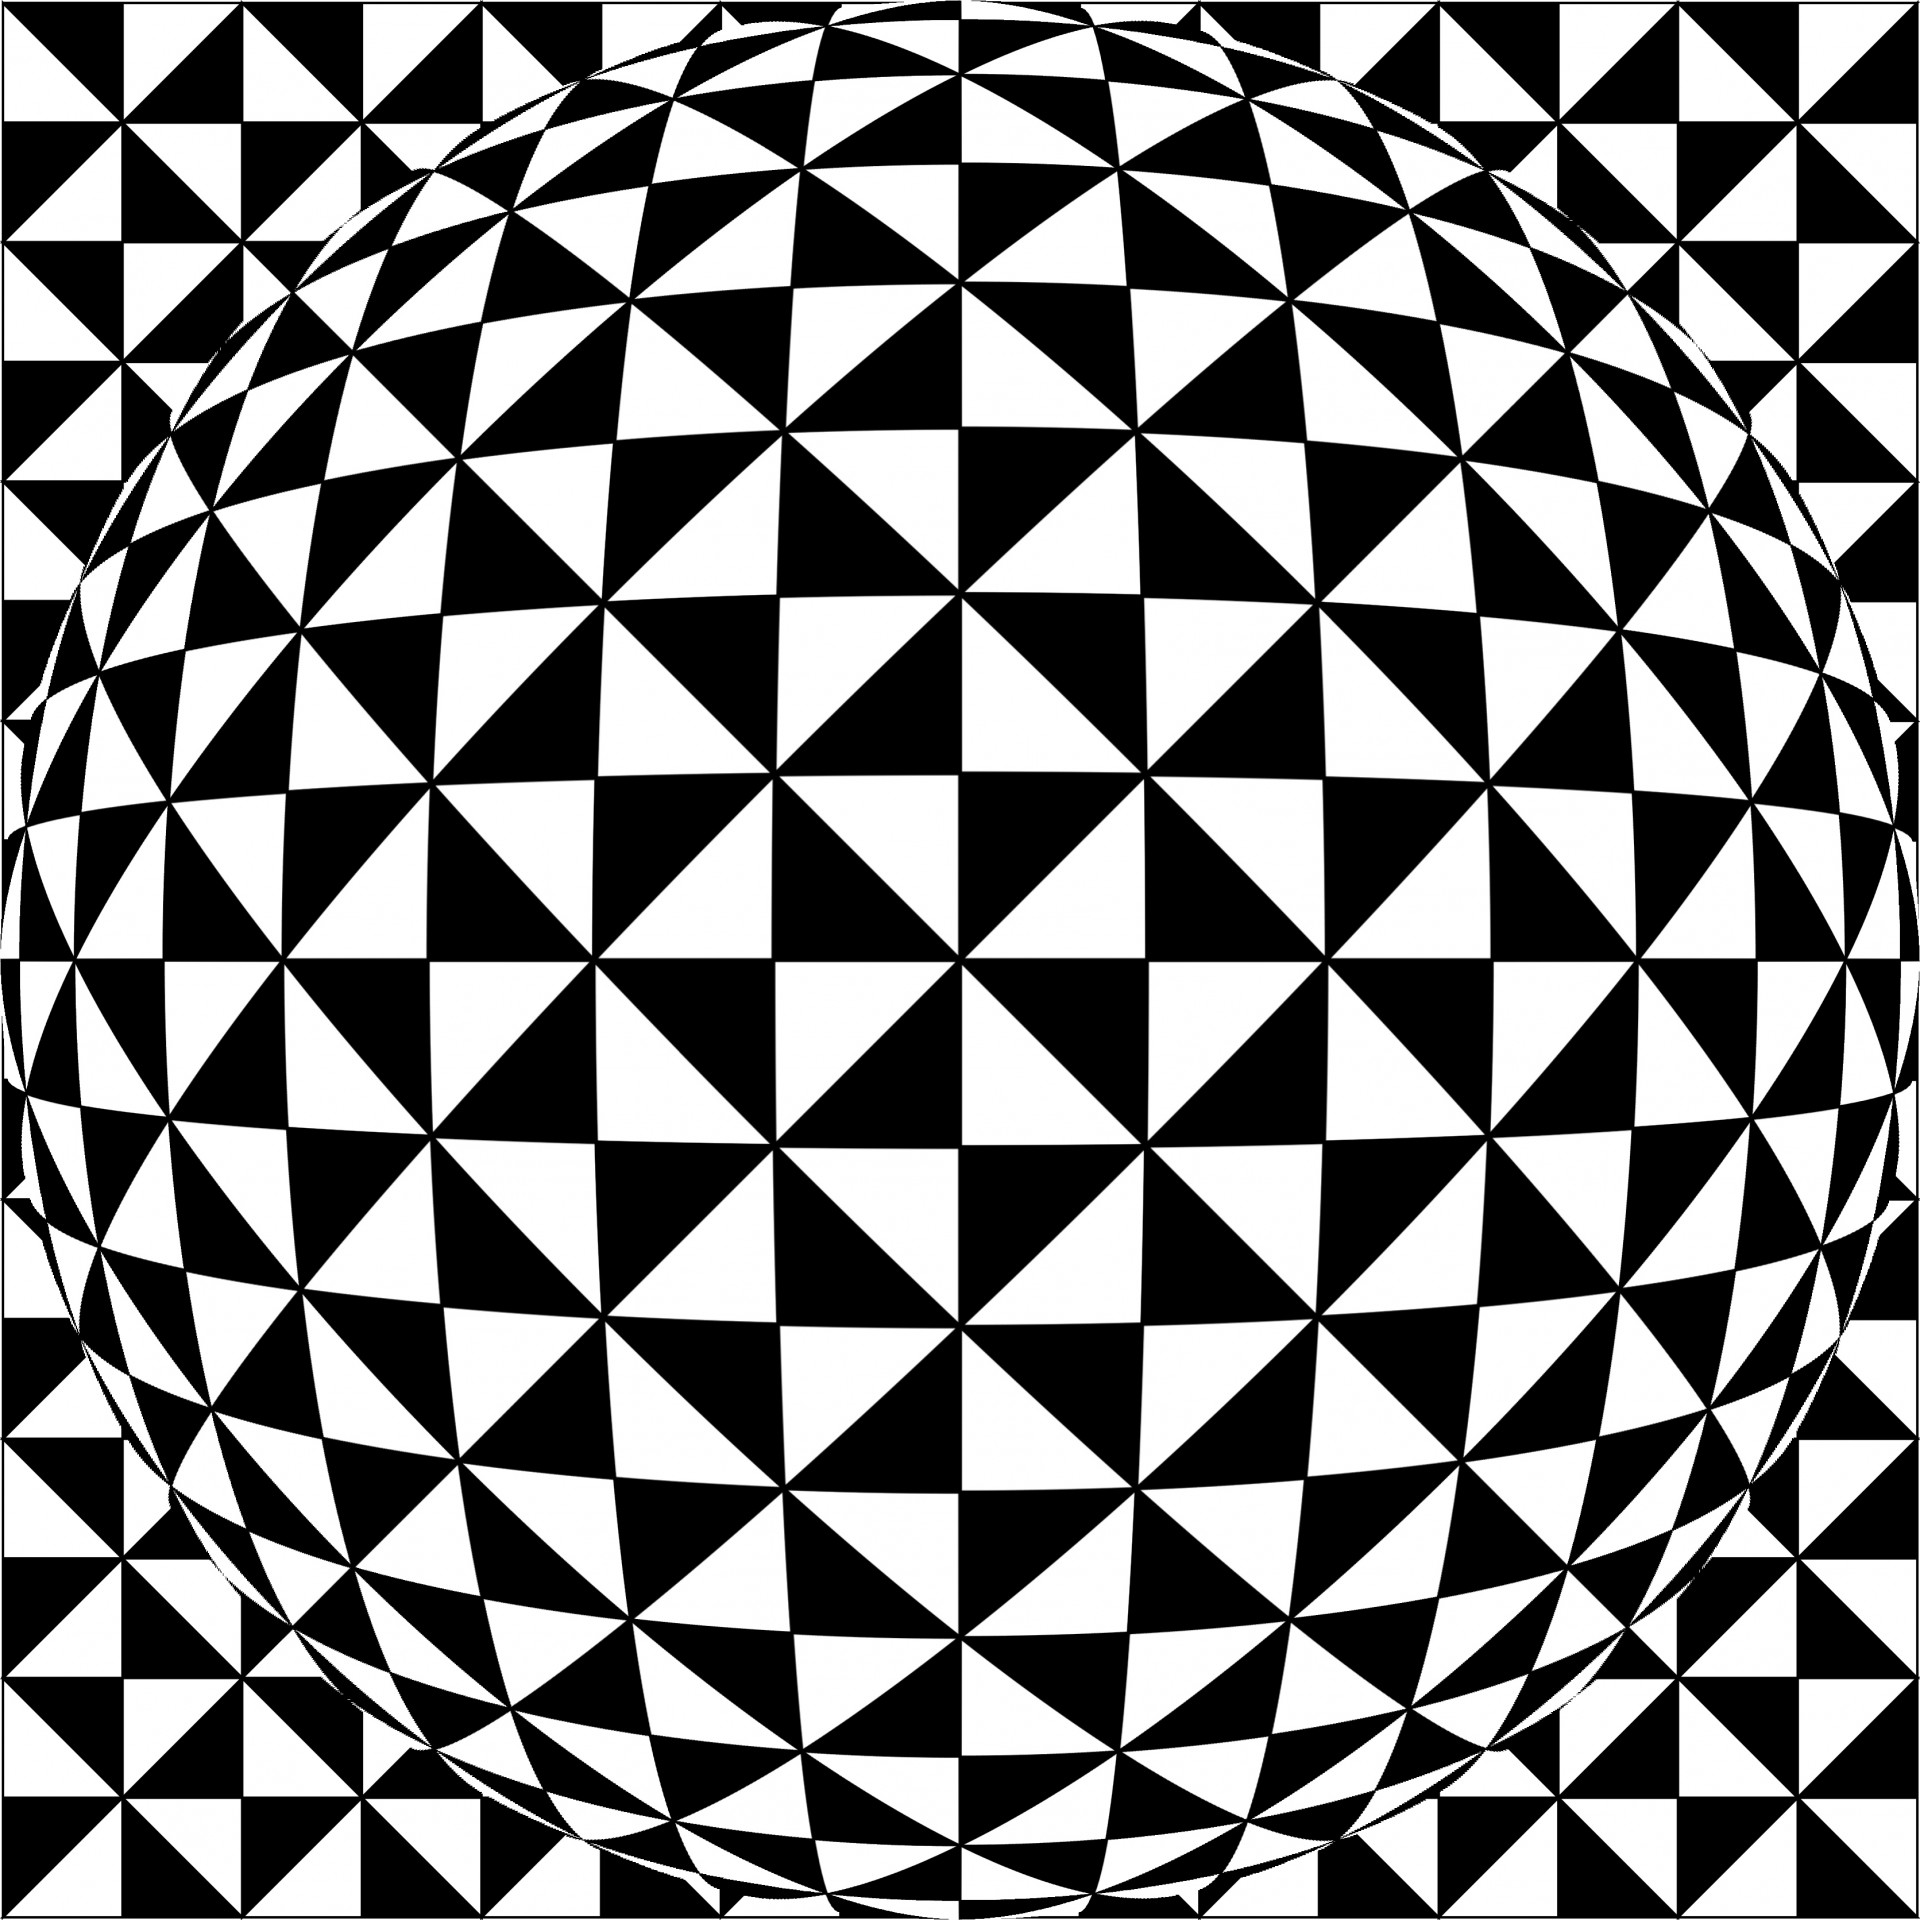 Geometric sphere in black and white background